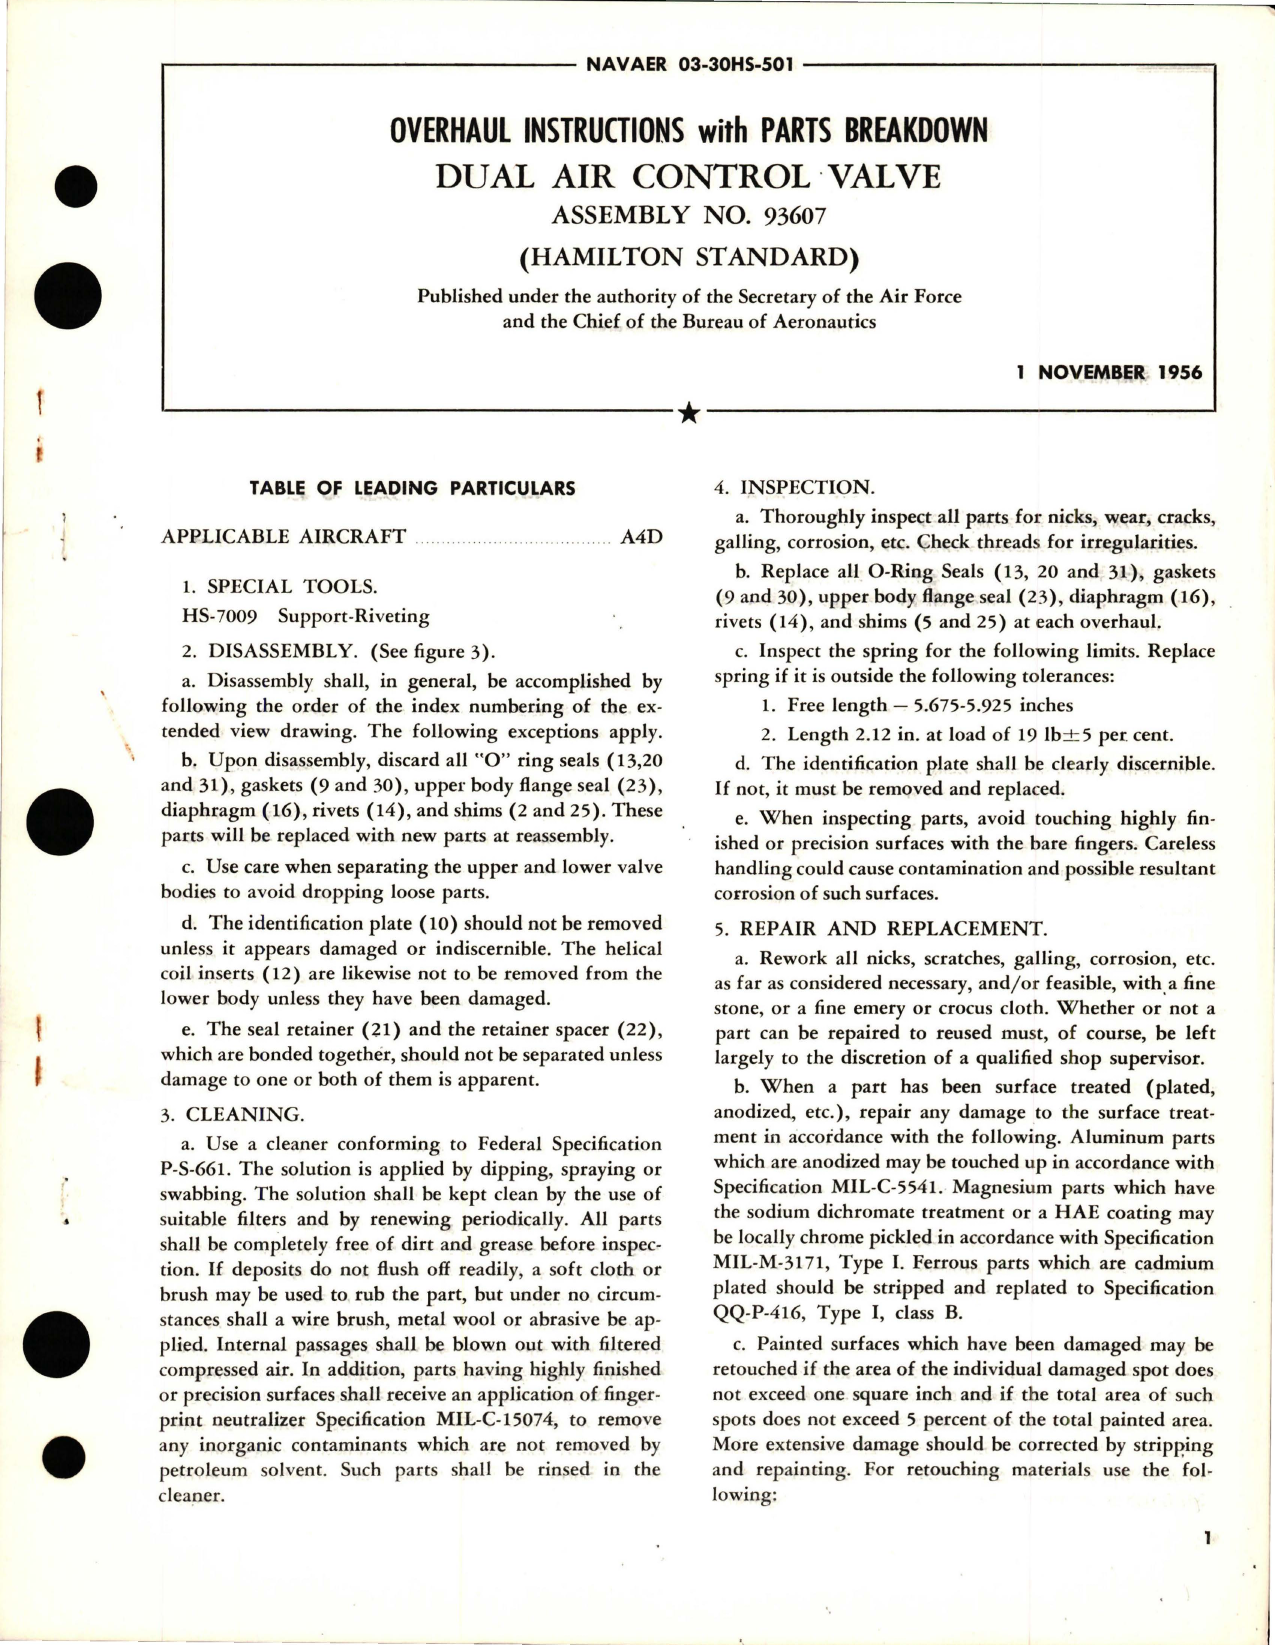 Sample page 1 from AirCorps Library document: Overhaul Instructions with Parts Breakdown for Dual Air Control Valve - Assembly 93607